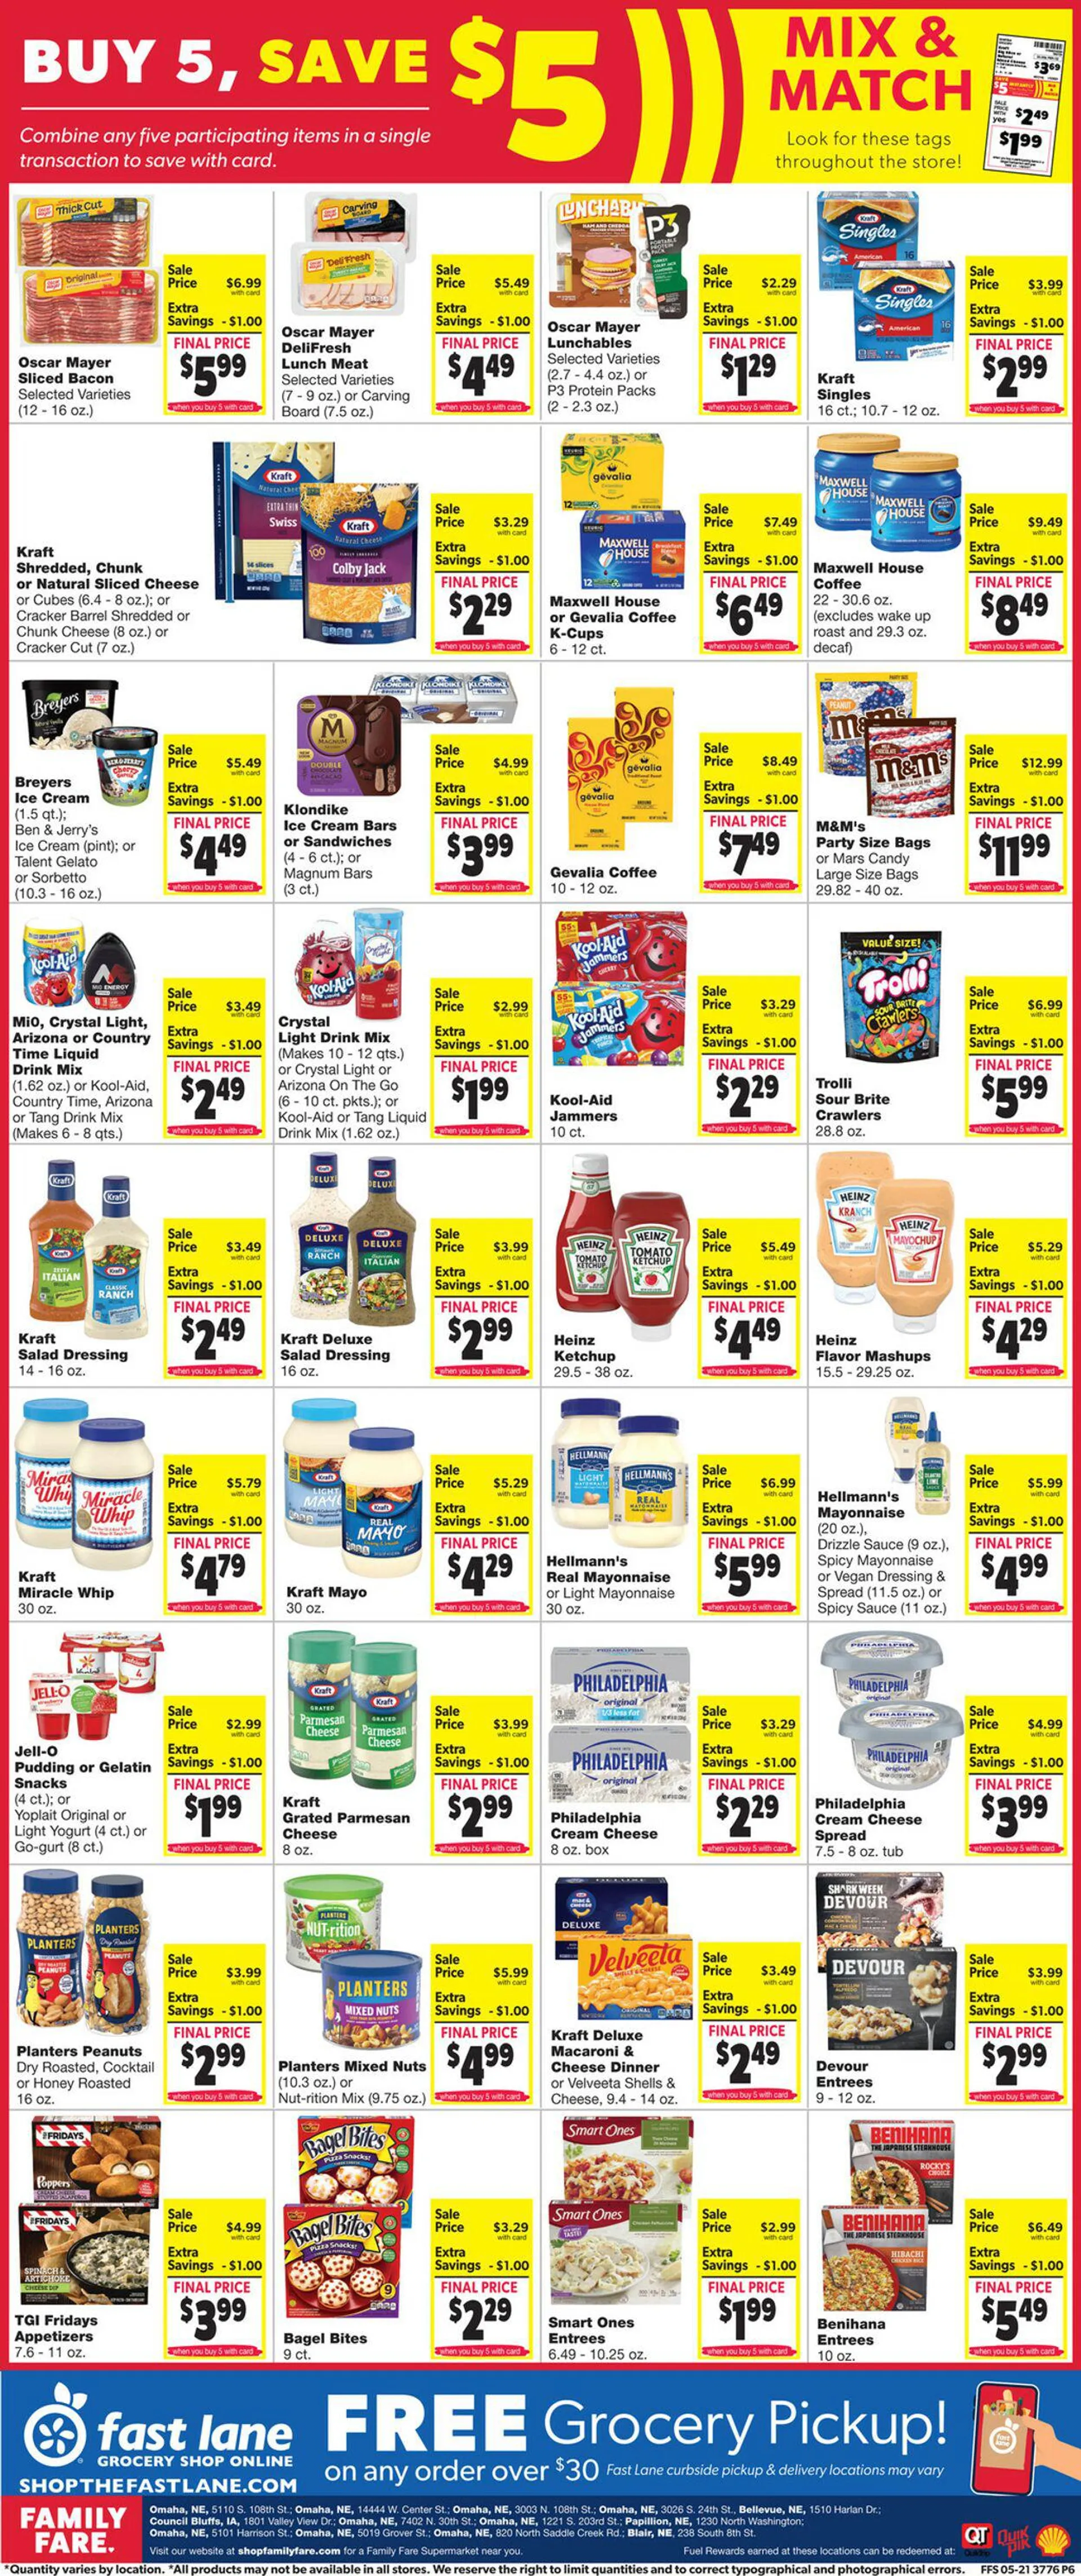 Family Fare Current weekly ad - 3